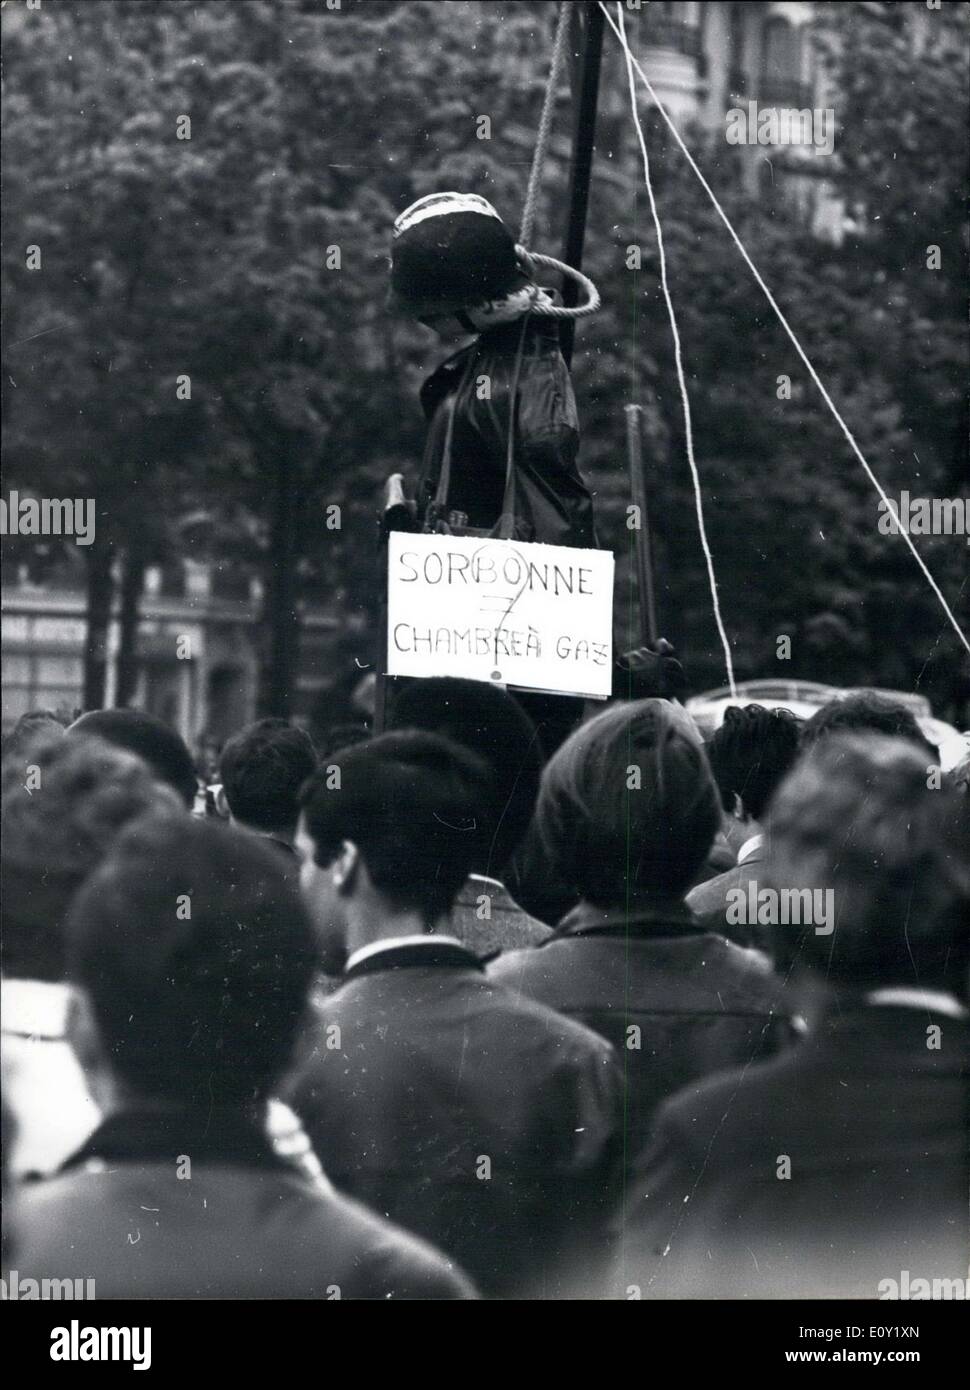 May 14, 1968 - Students and Workers Protest March Paris Stock Photo